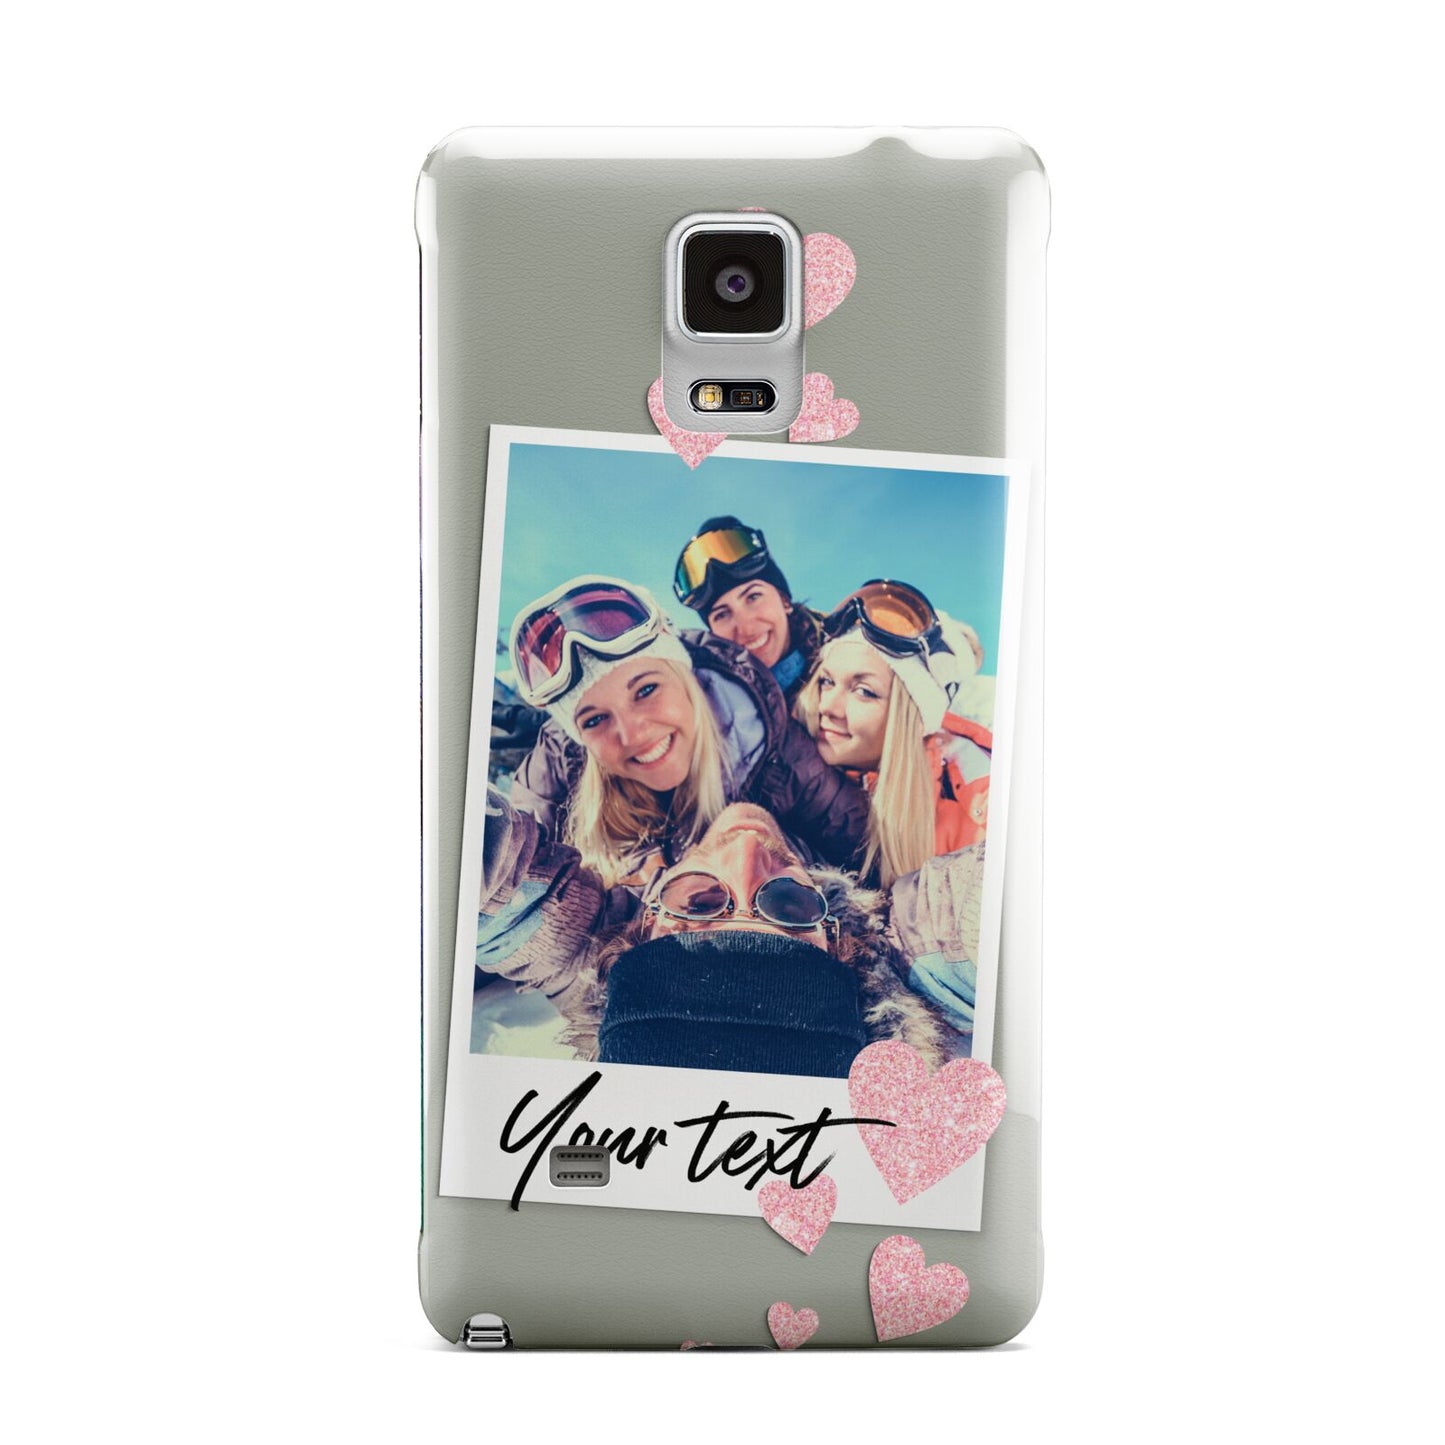 Photo with Text Samsung Galaxy Note 4 Case